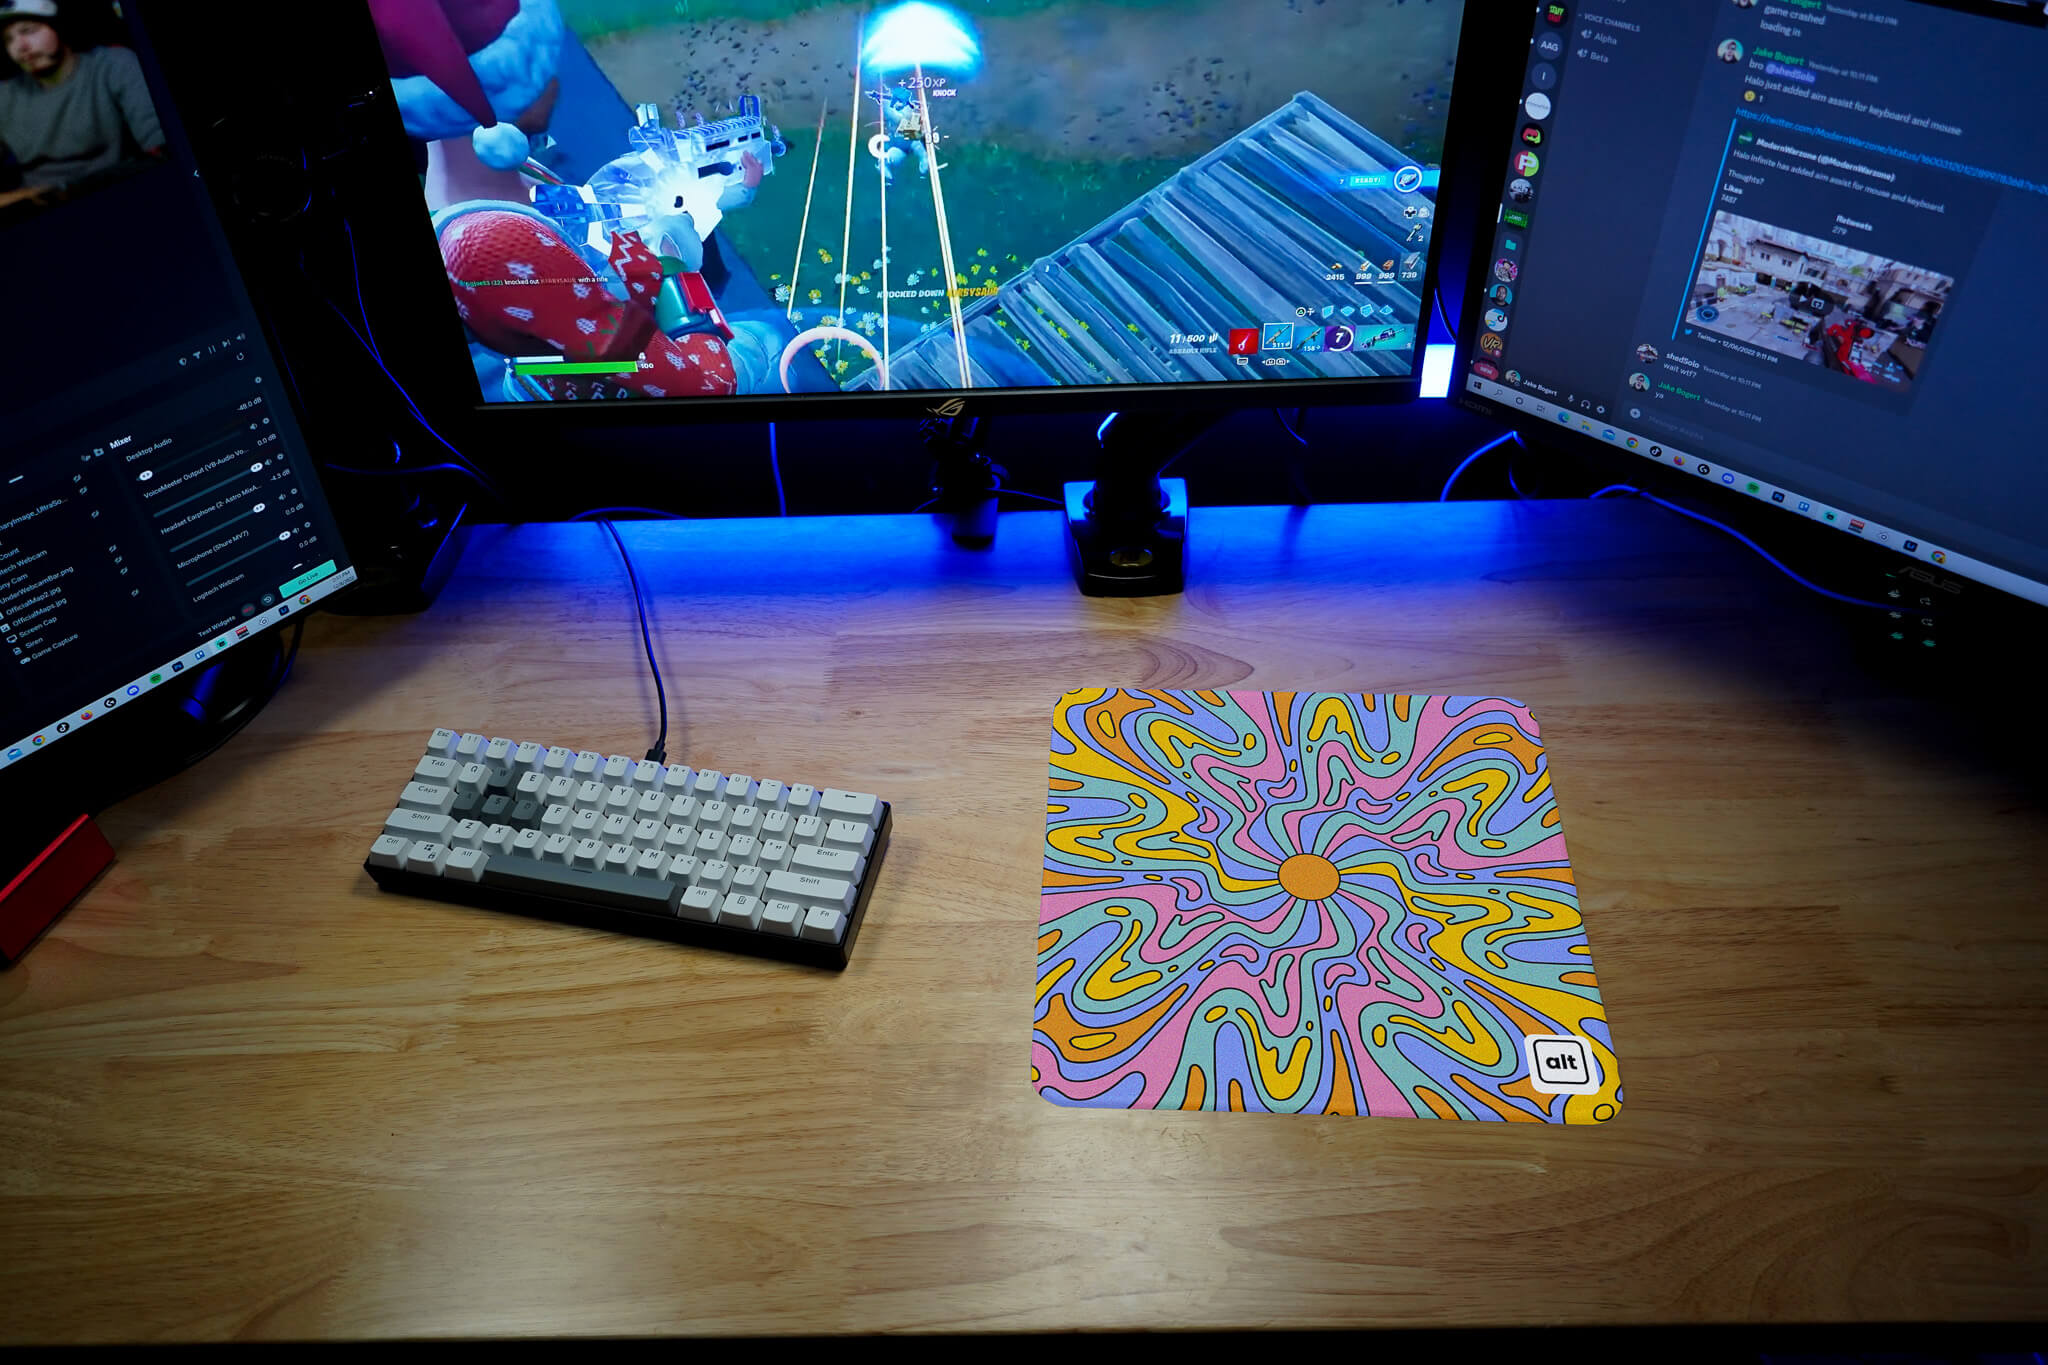 Drippy Vibes Mousepad